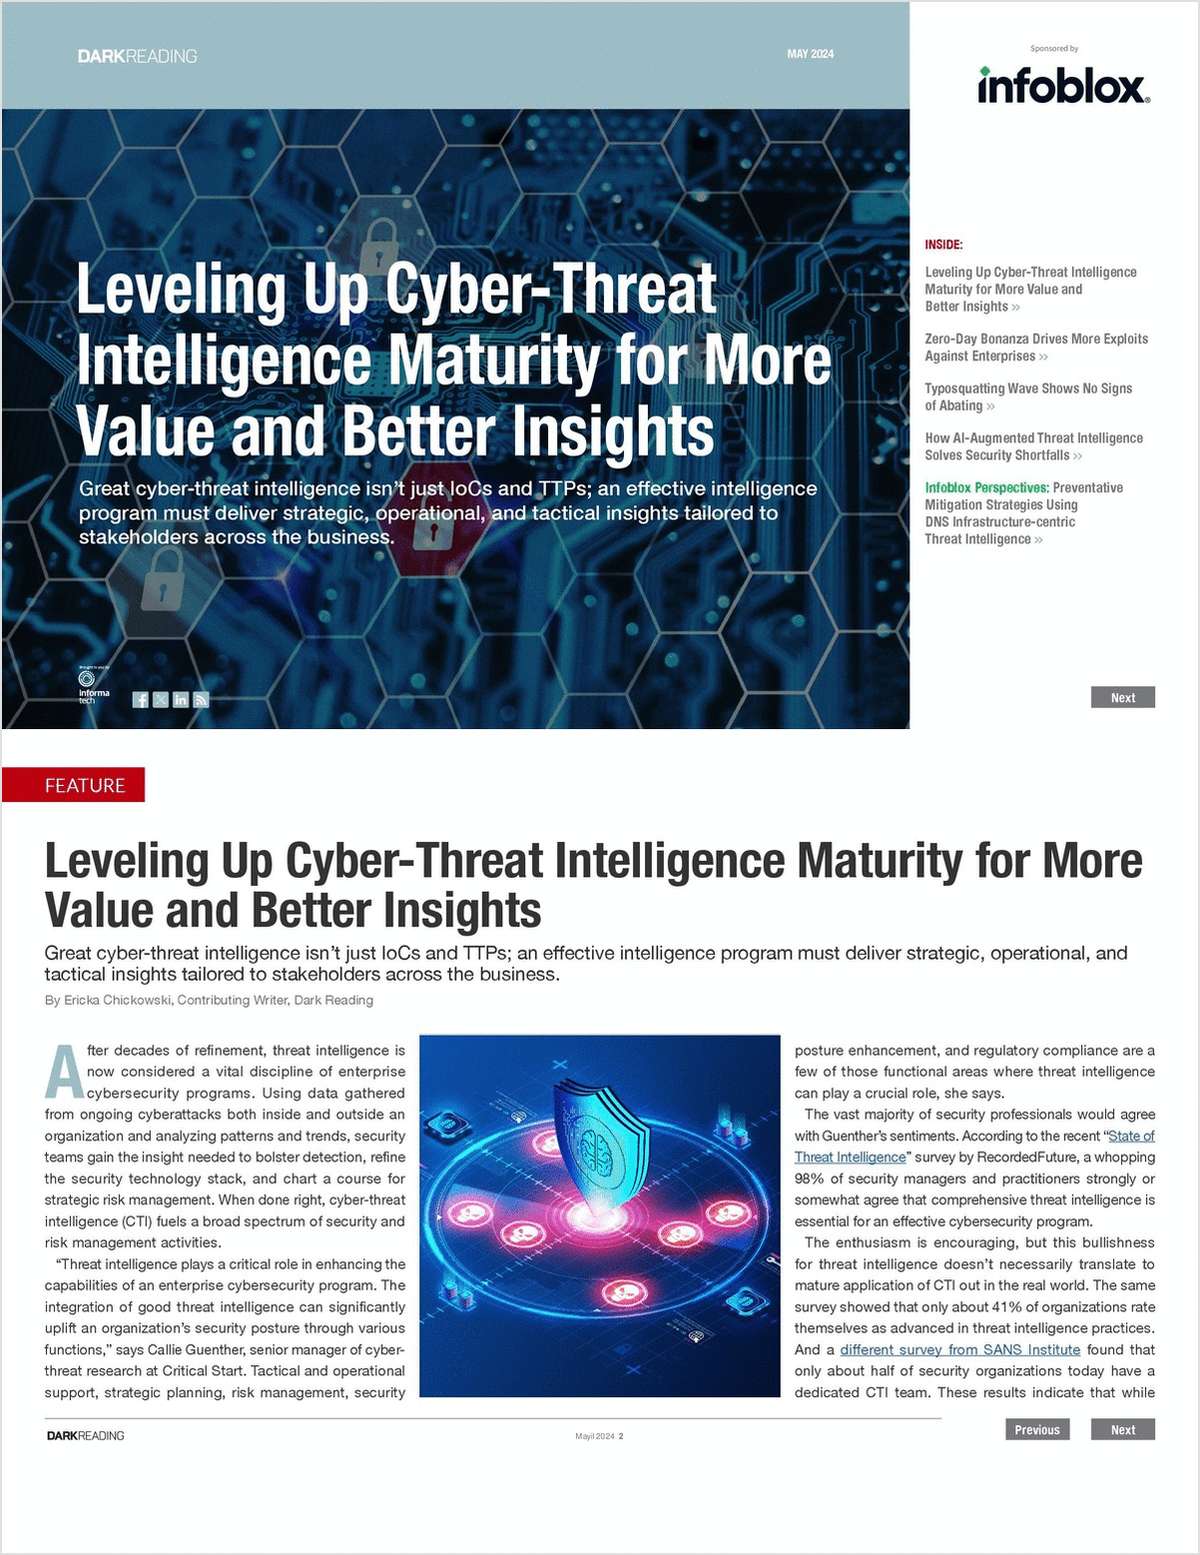 Leveling Up Cyber-Threat Intelligence Maturity for More Value and Better Insights